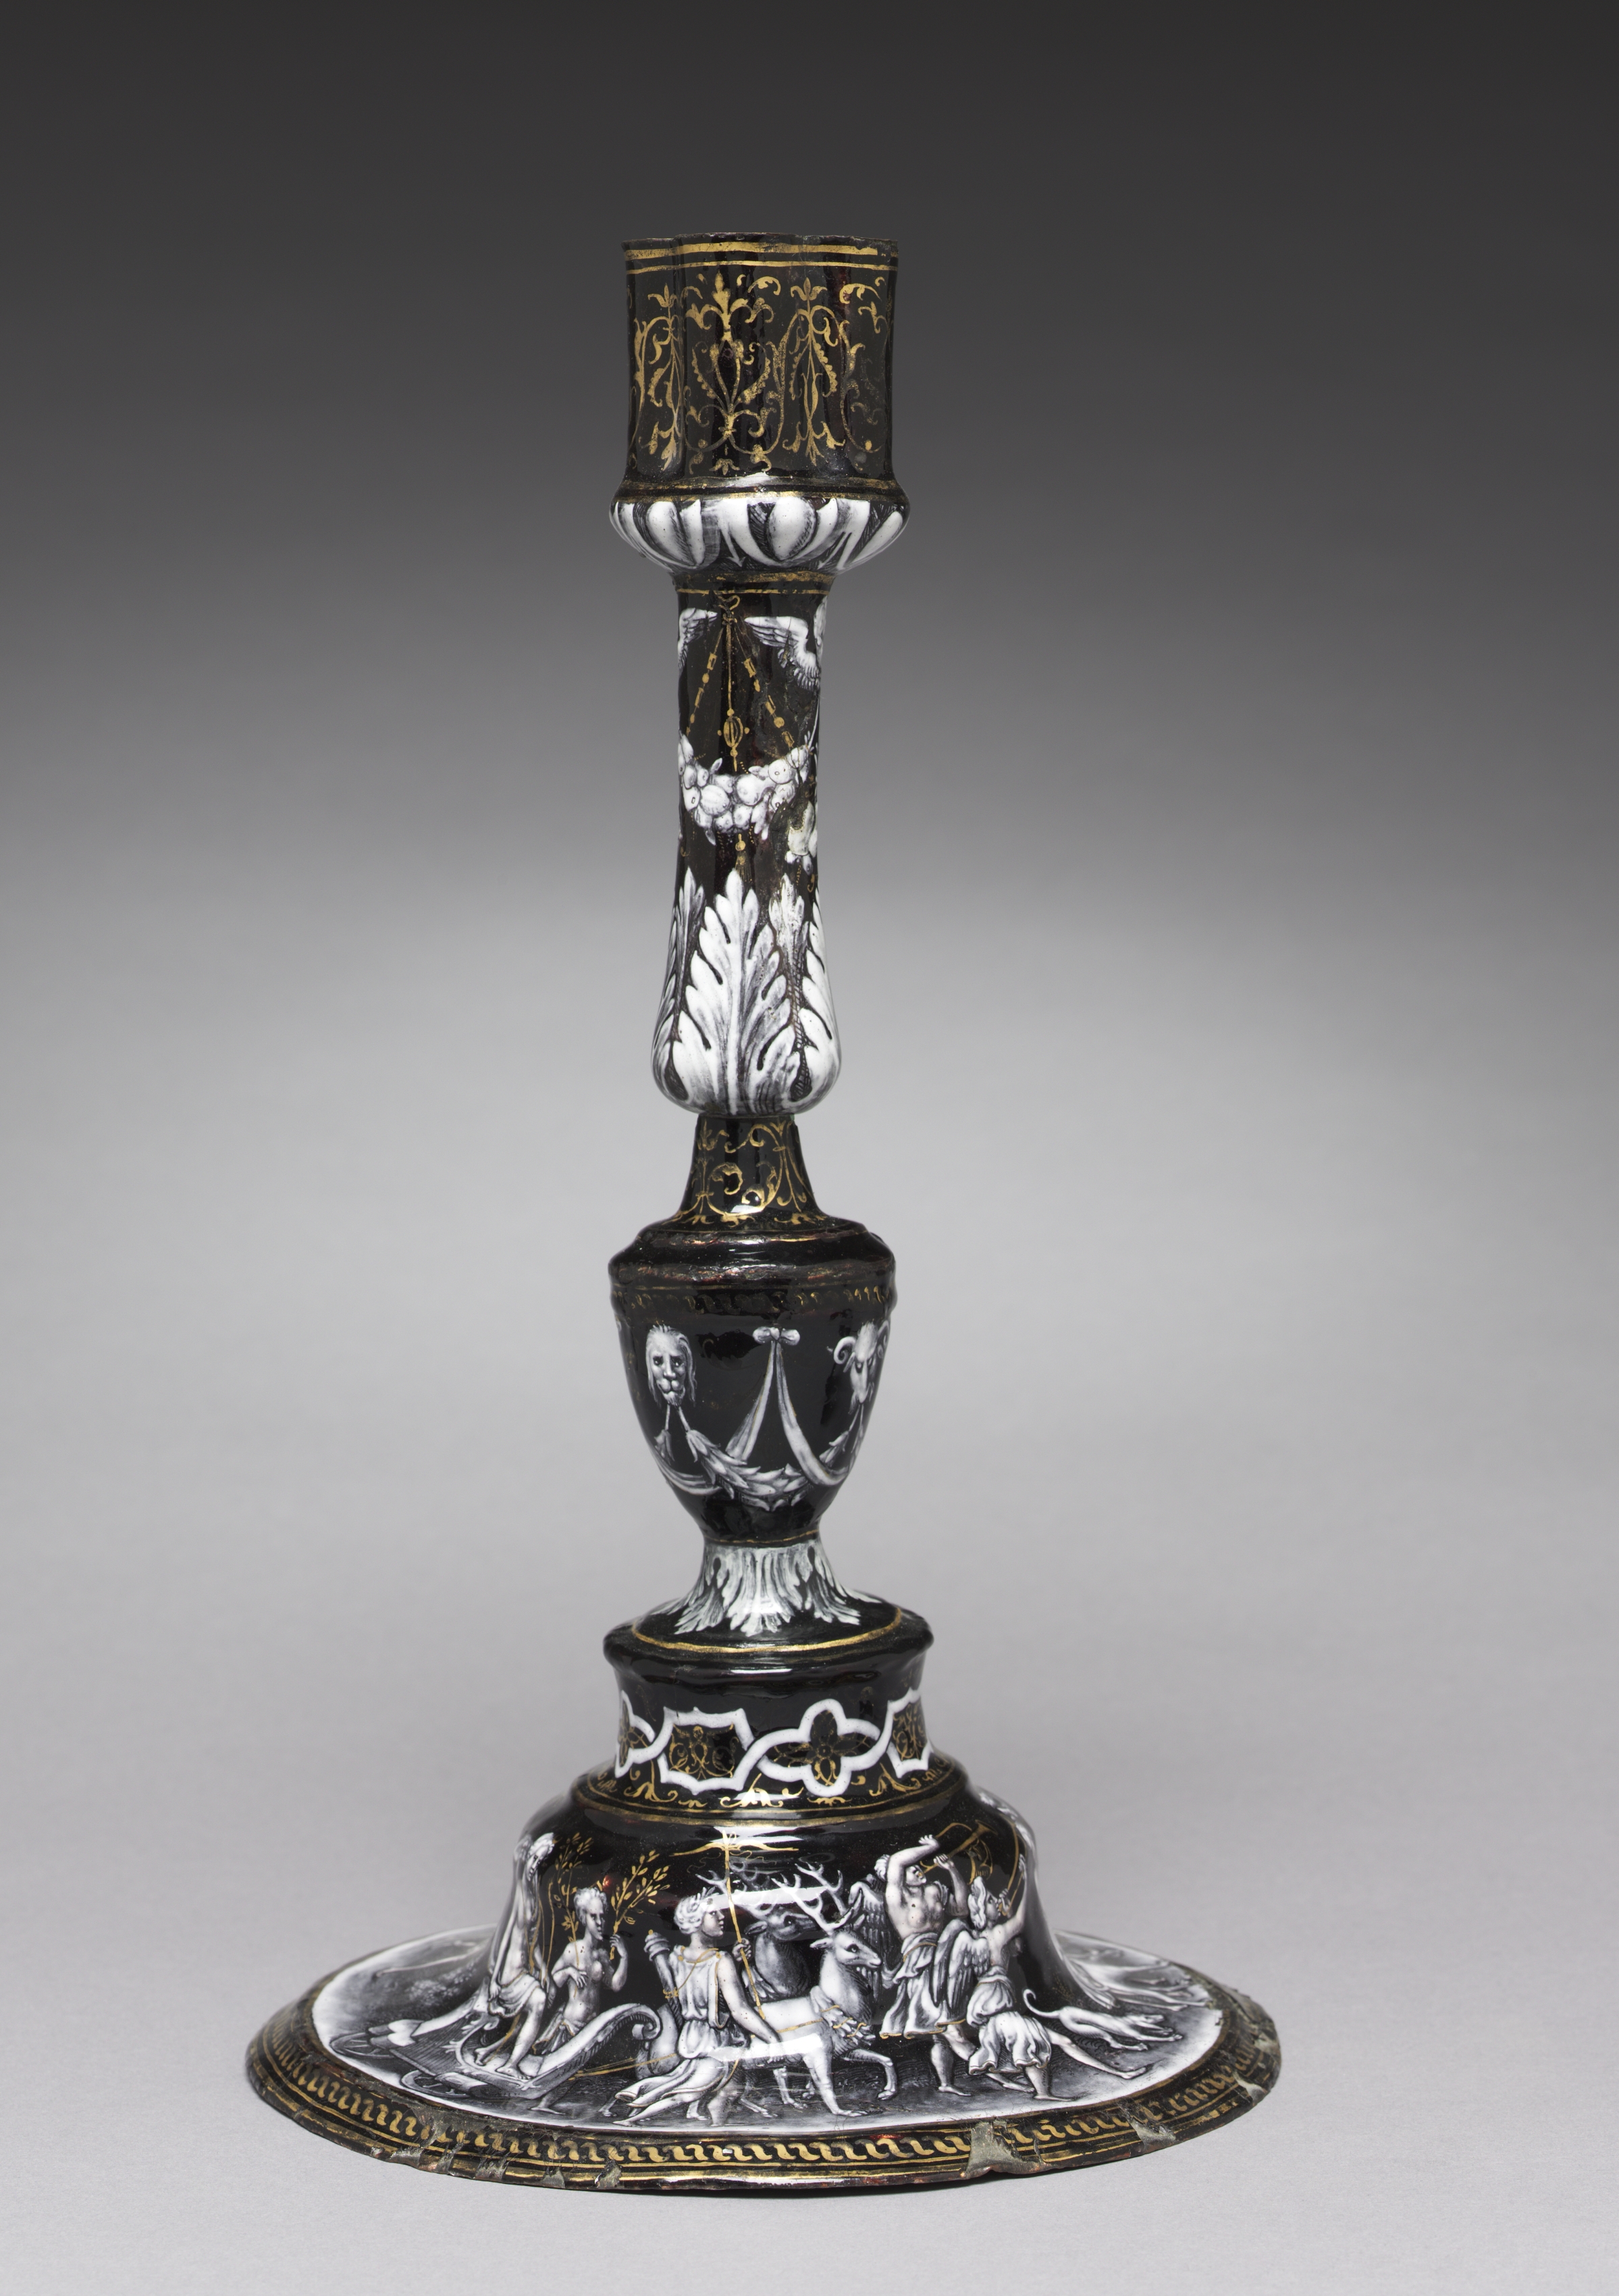 Candlestick Depicting the Triumph of Diana